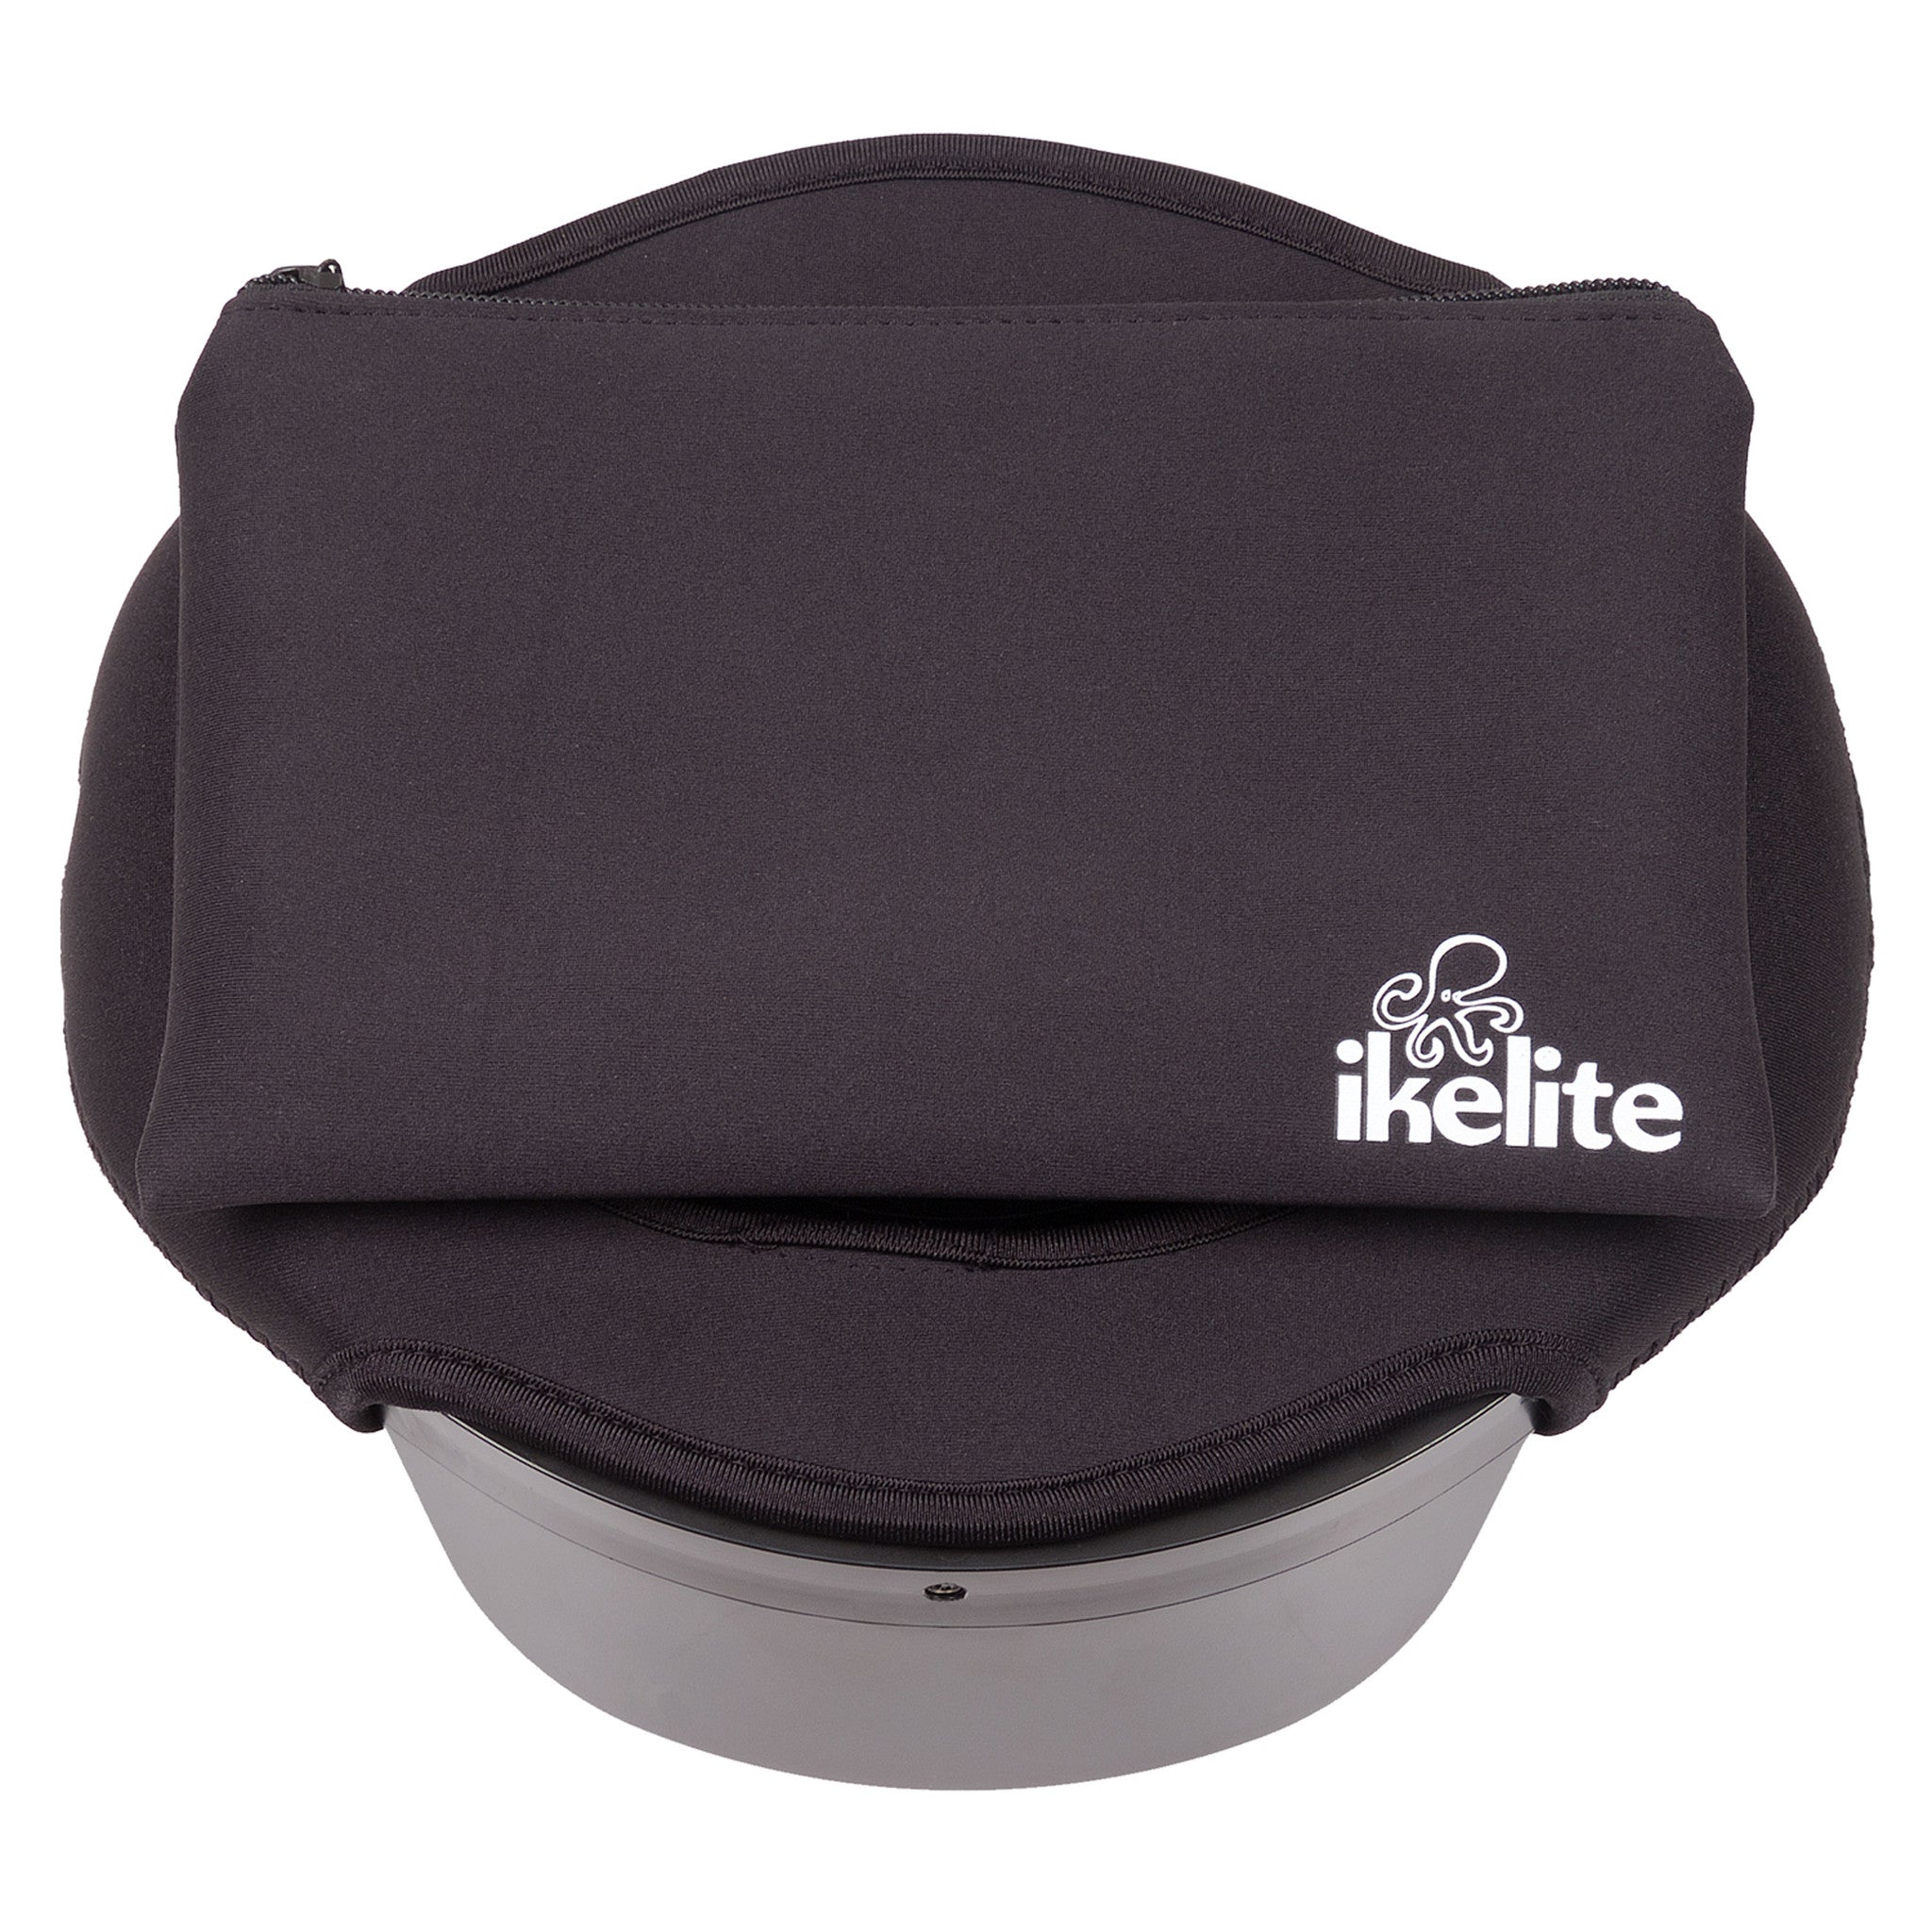 Neoprene Rear Cover for 8" Dome Ports